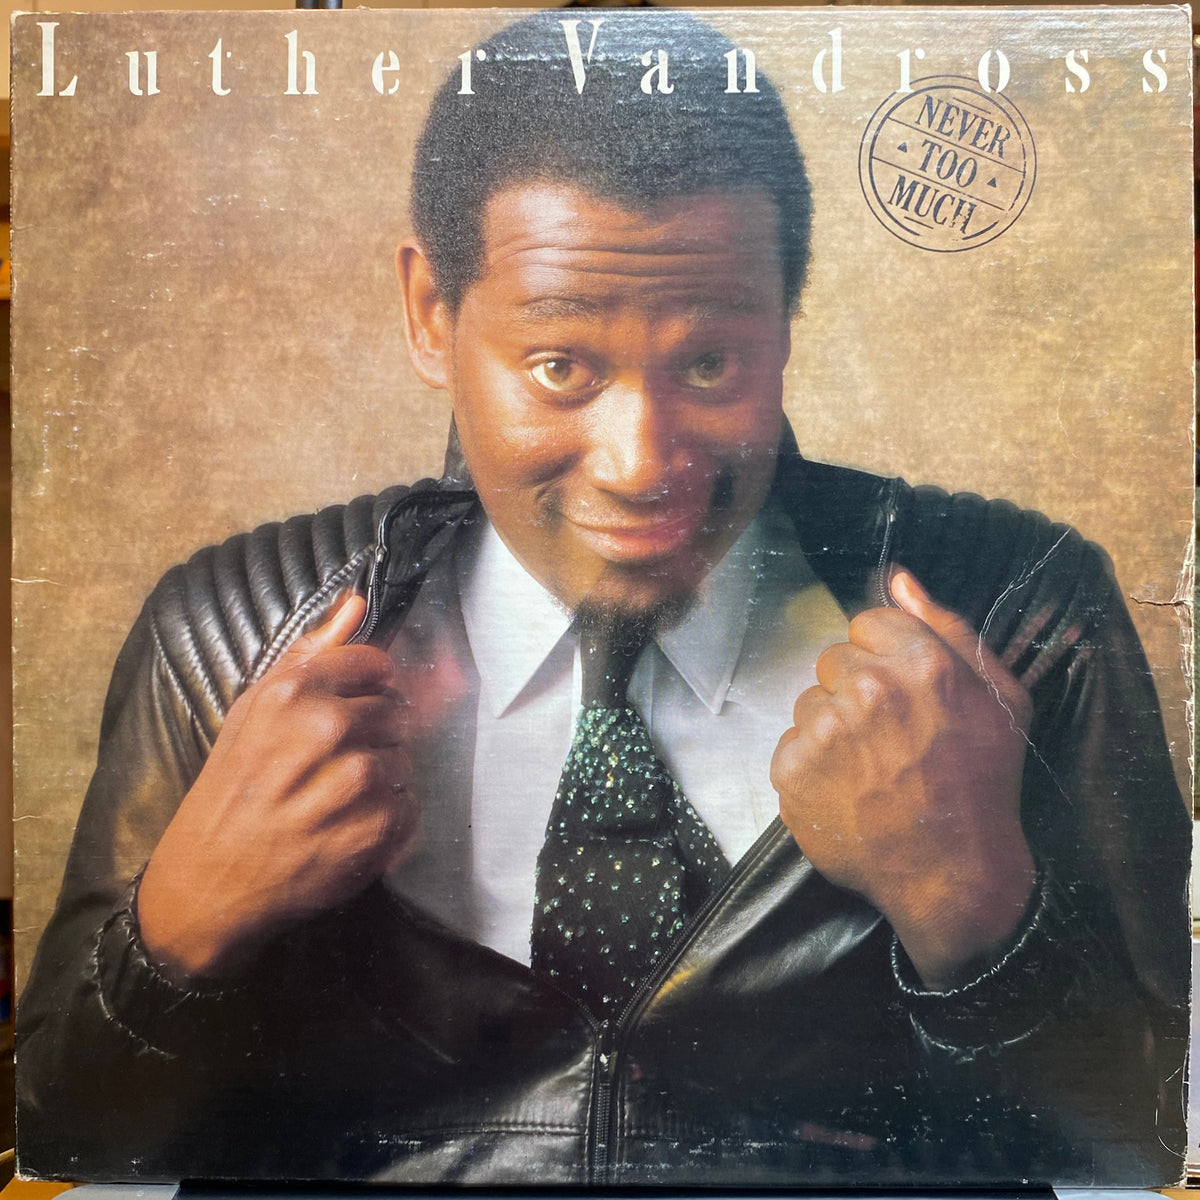 Luther Vandross / Never Too Much | VINYL7 RECORDS